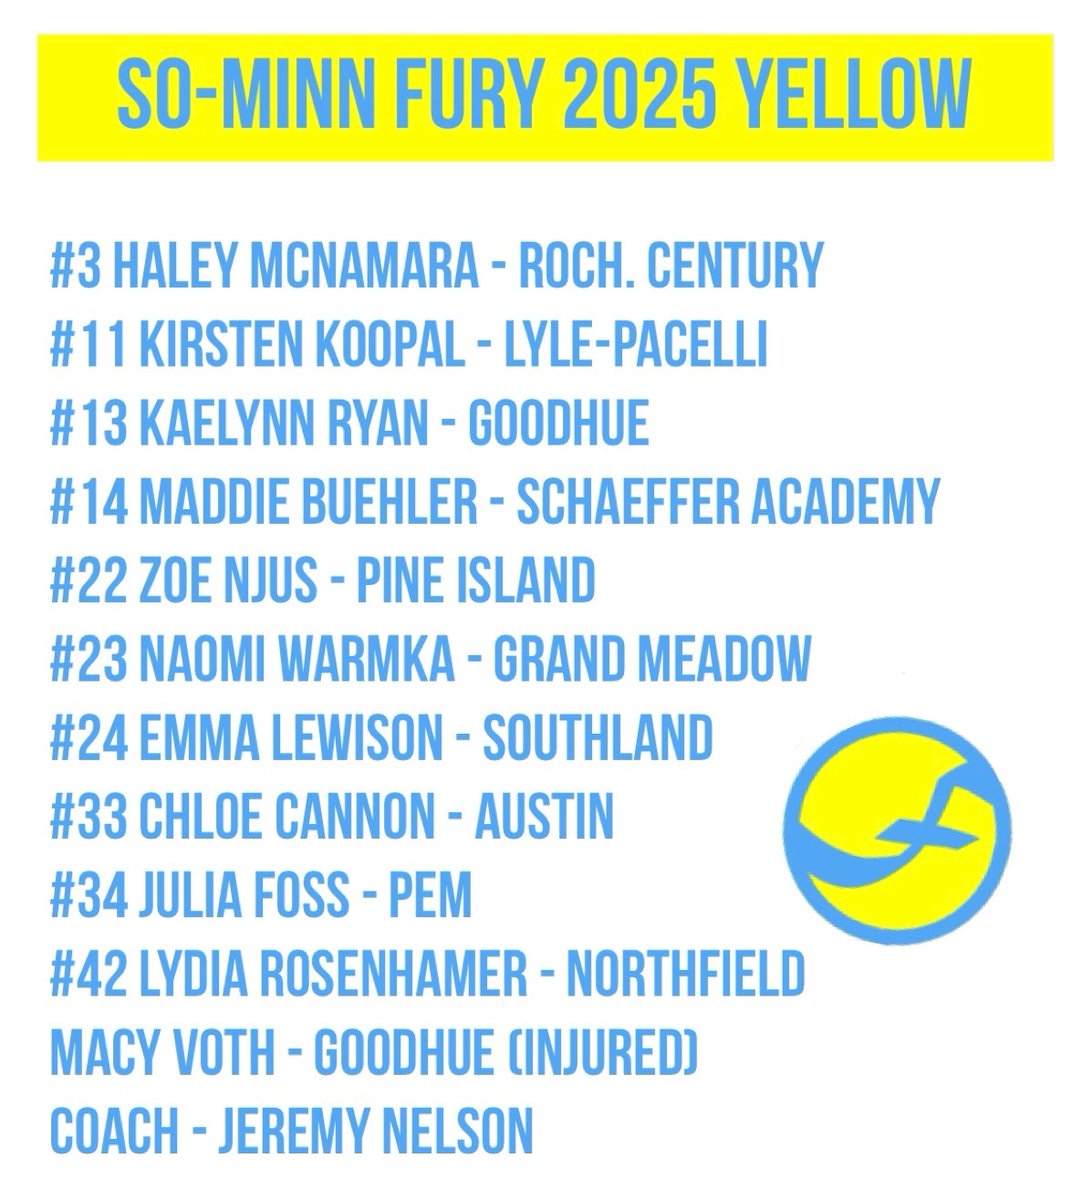 Here is the squad for the upcoming AAU season! @SoMinnFury @PGHMinnesota @JrAllStarMN @FiveStateHoops @TheMRR7